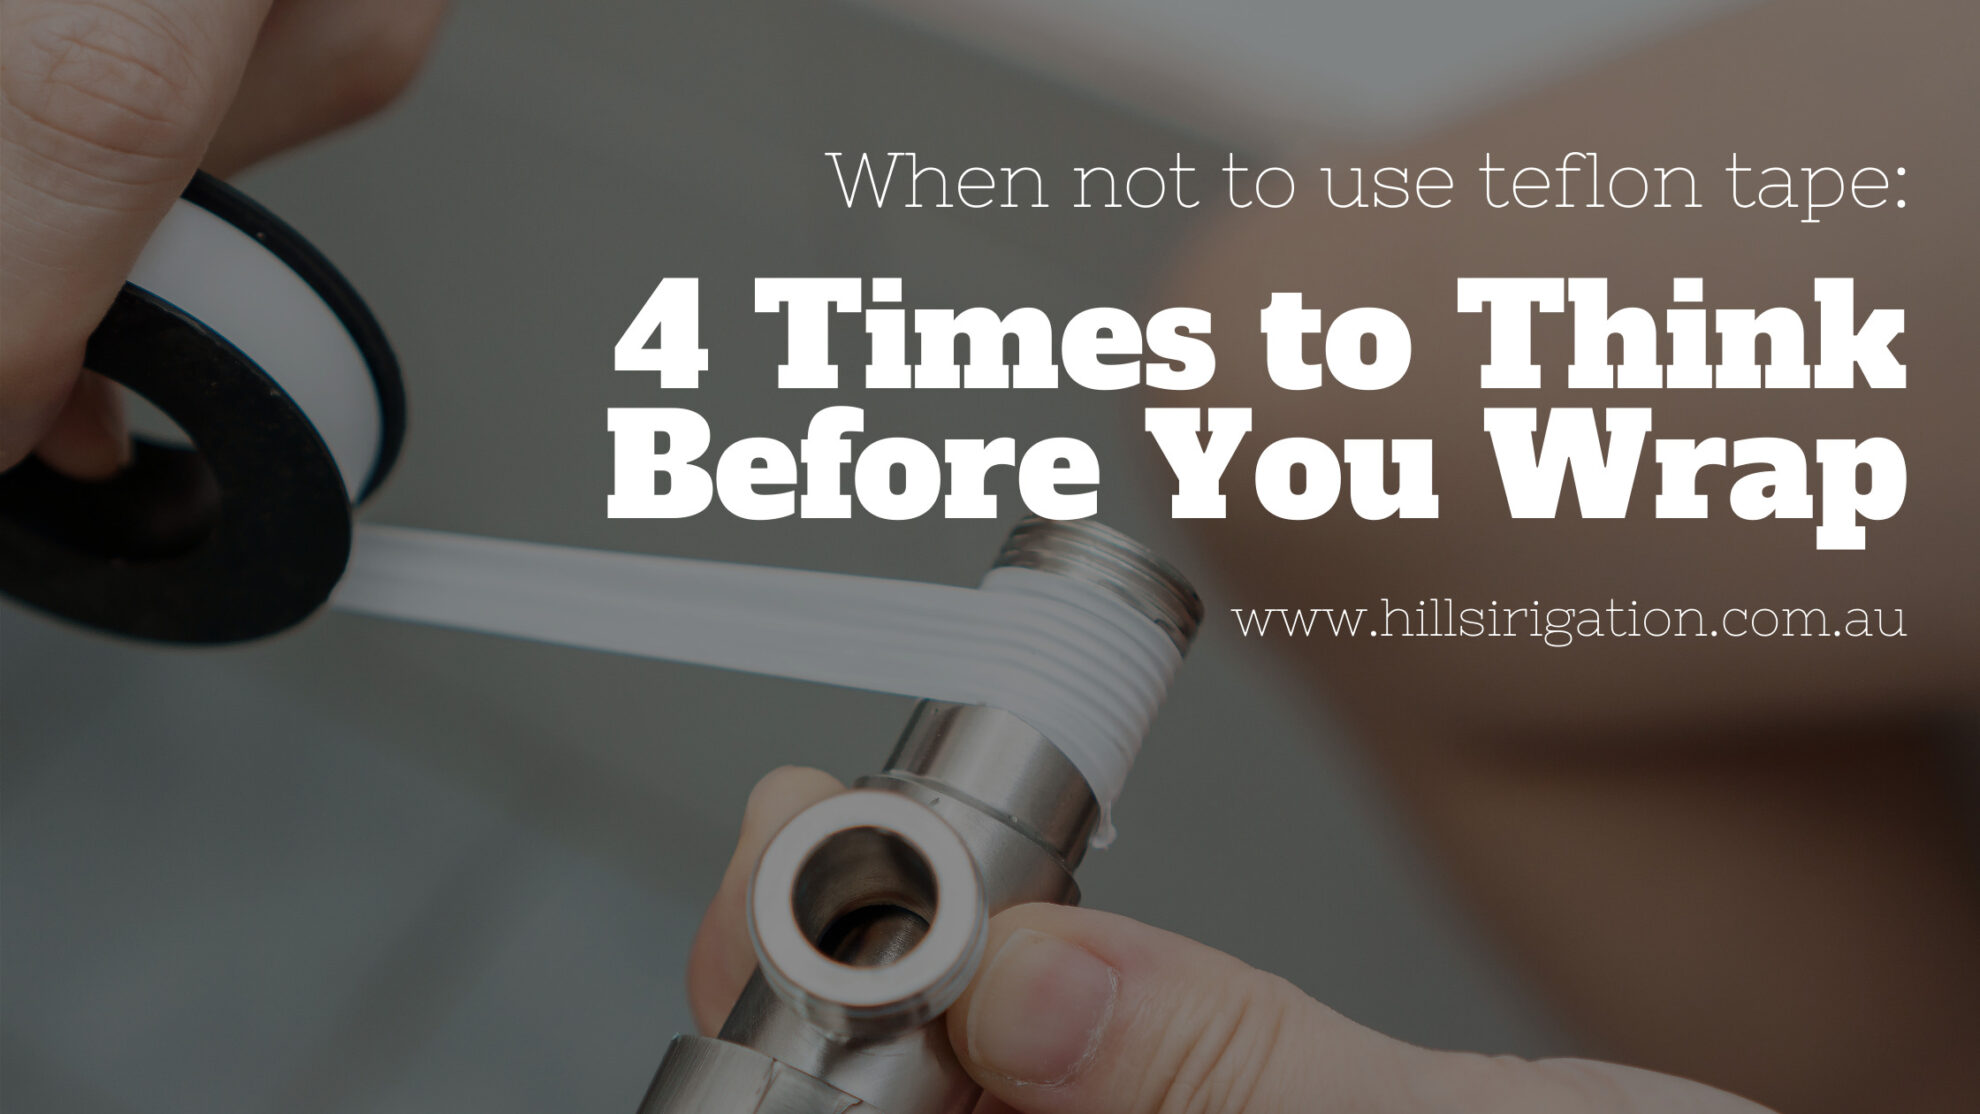 When Not To Use Teflon Tape: 4 Times to Think Before You Wrap